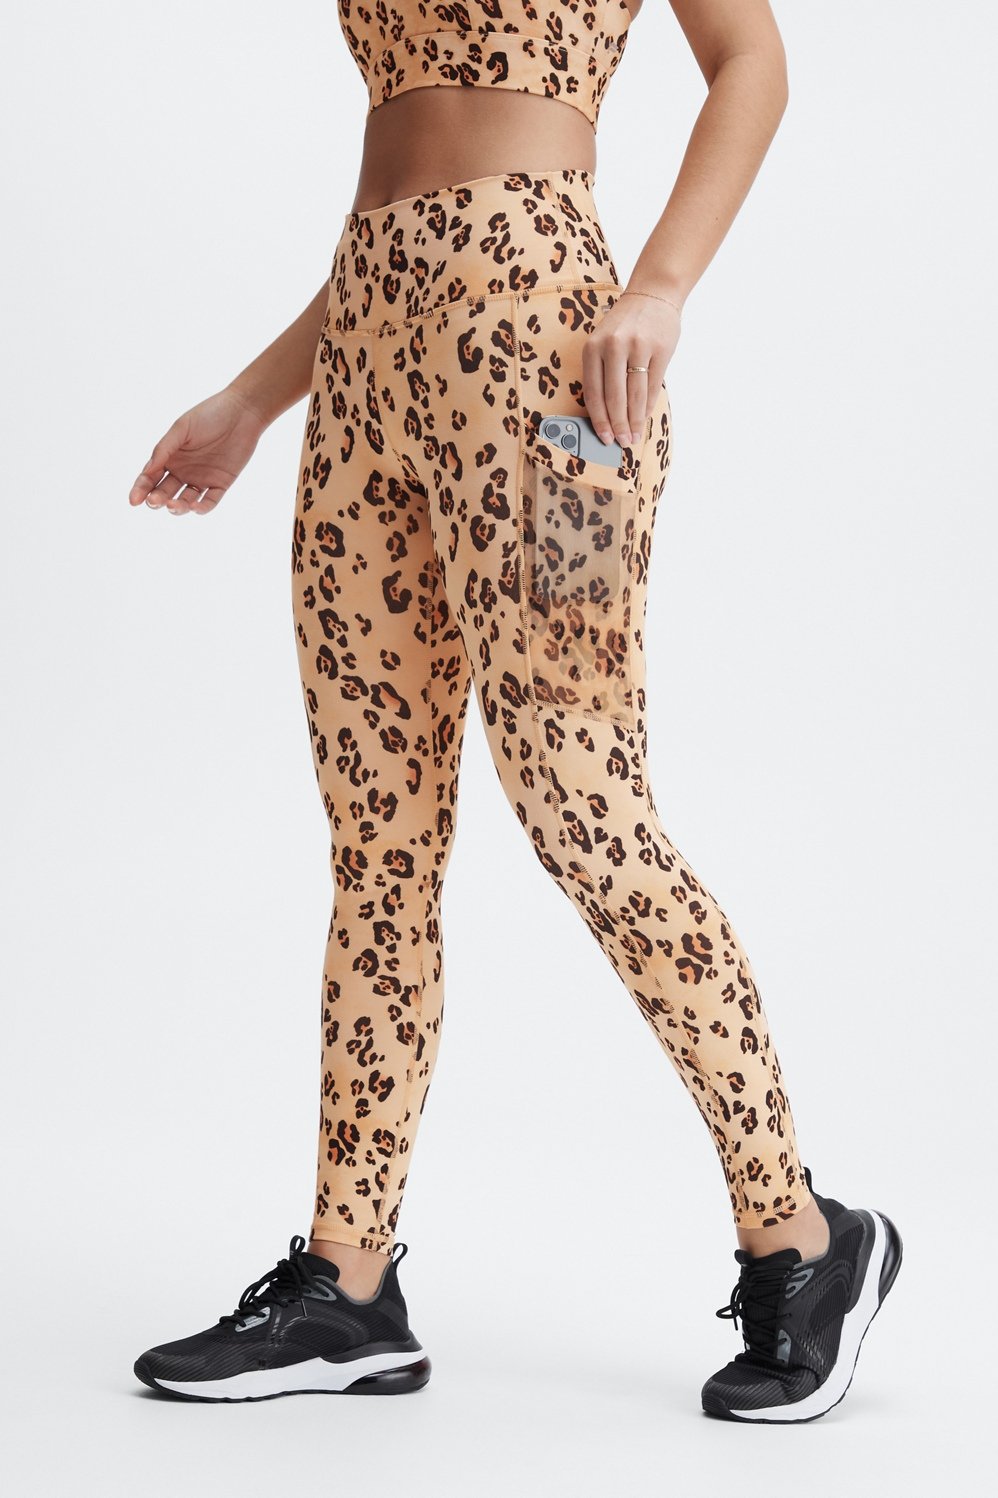 ZOOSIXX High Waisted Leggings for Women - Tummy Control Soft Opaque Printed  Pants with Camo, Leopard for Running Workout